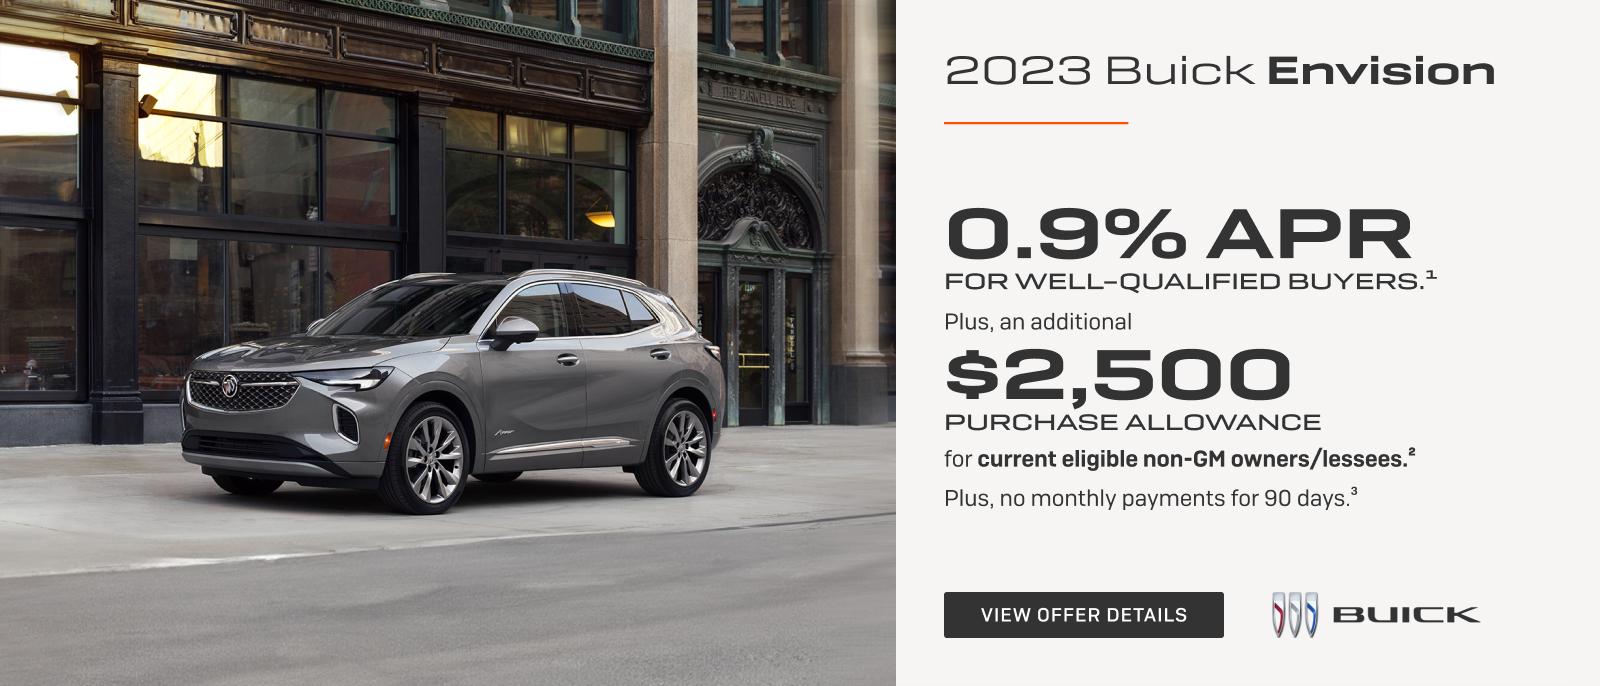 0.9% APR 
FOR WELL-QUALIFIED BUYERS.1

Plus, an additional $2,500 PURCHASE ALLOWANCE for current eligible non-GM owners/lessees.2

Plus, no monthly payments for 90 days.3